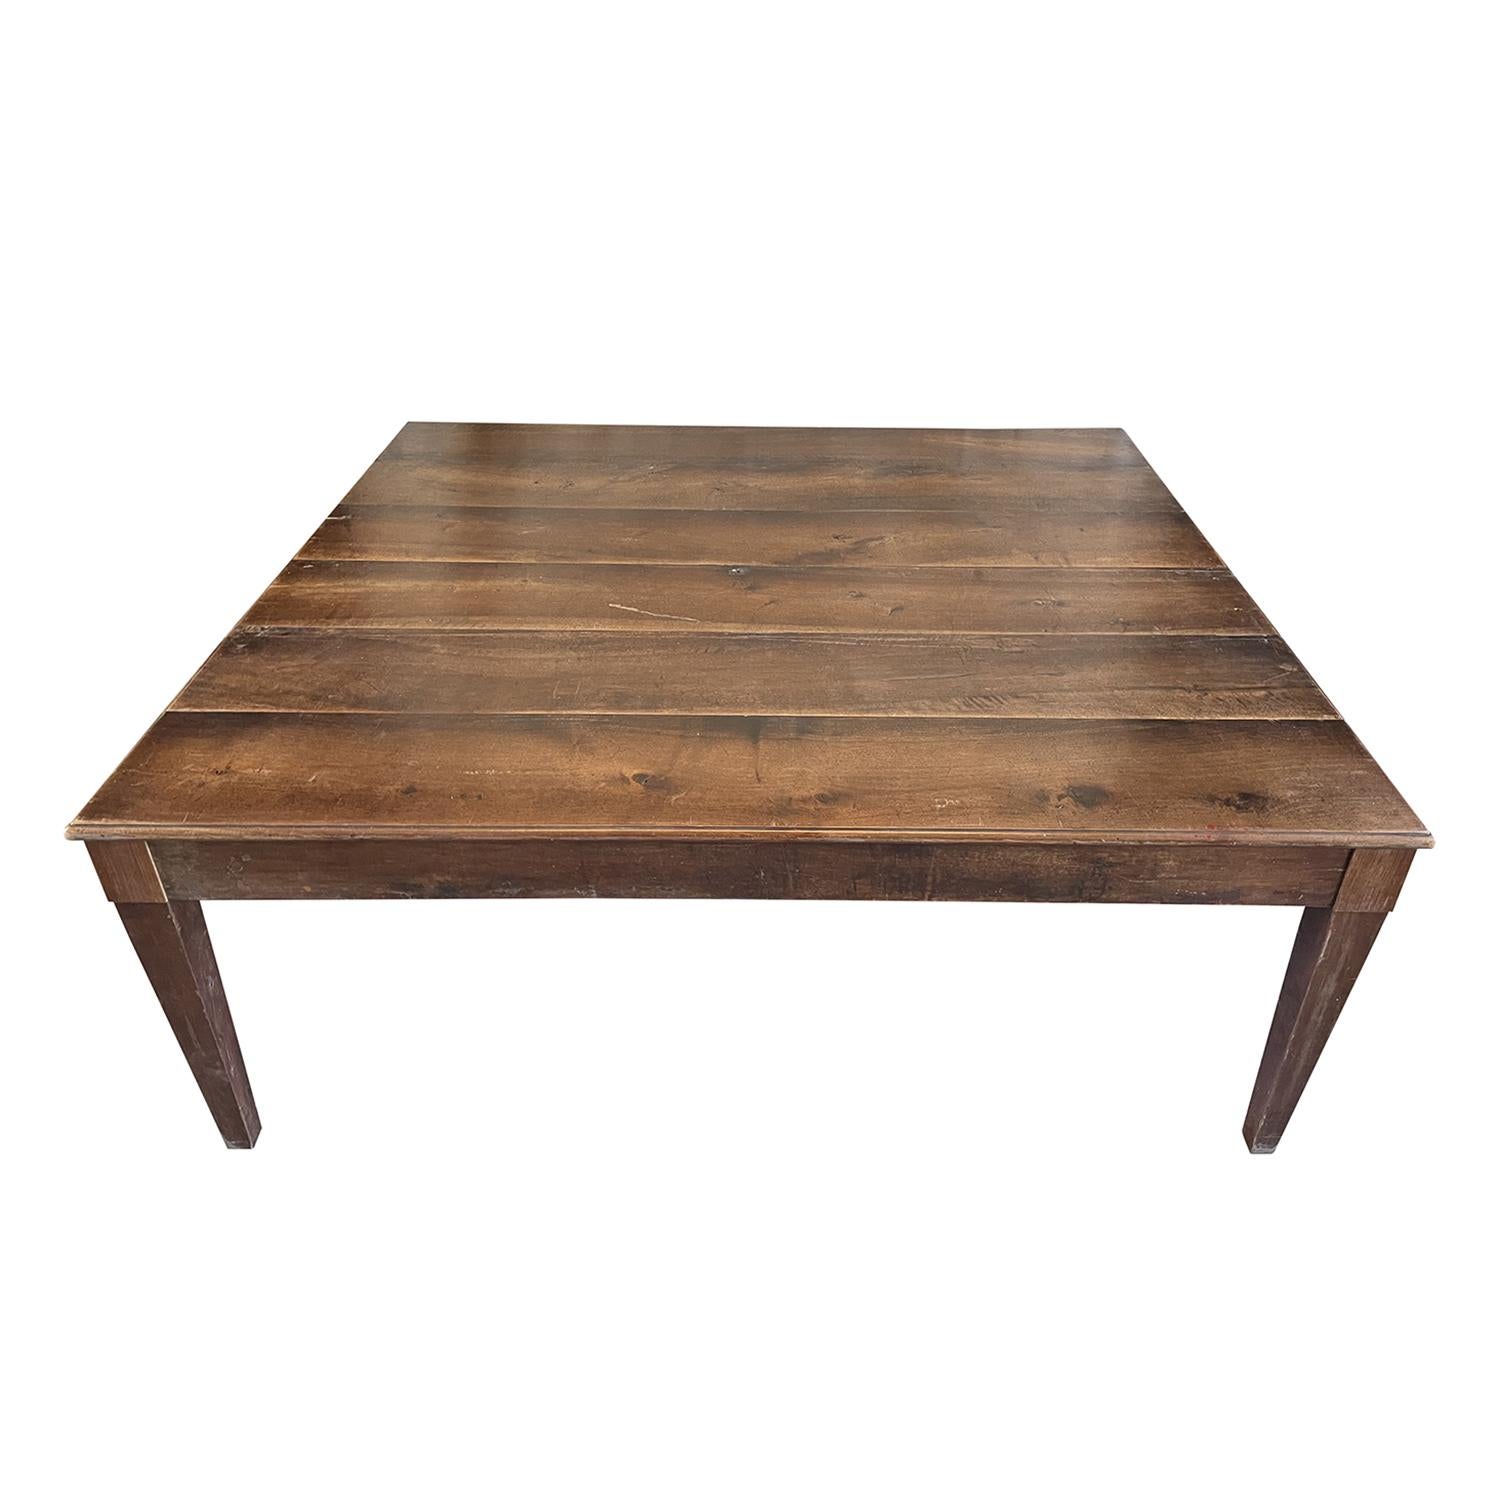 18th Century French Antique, Neo-Classical Style Provencal Walnut Dining Table For Sale 1